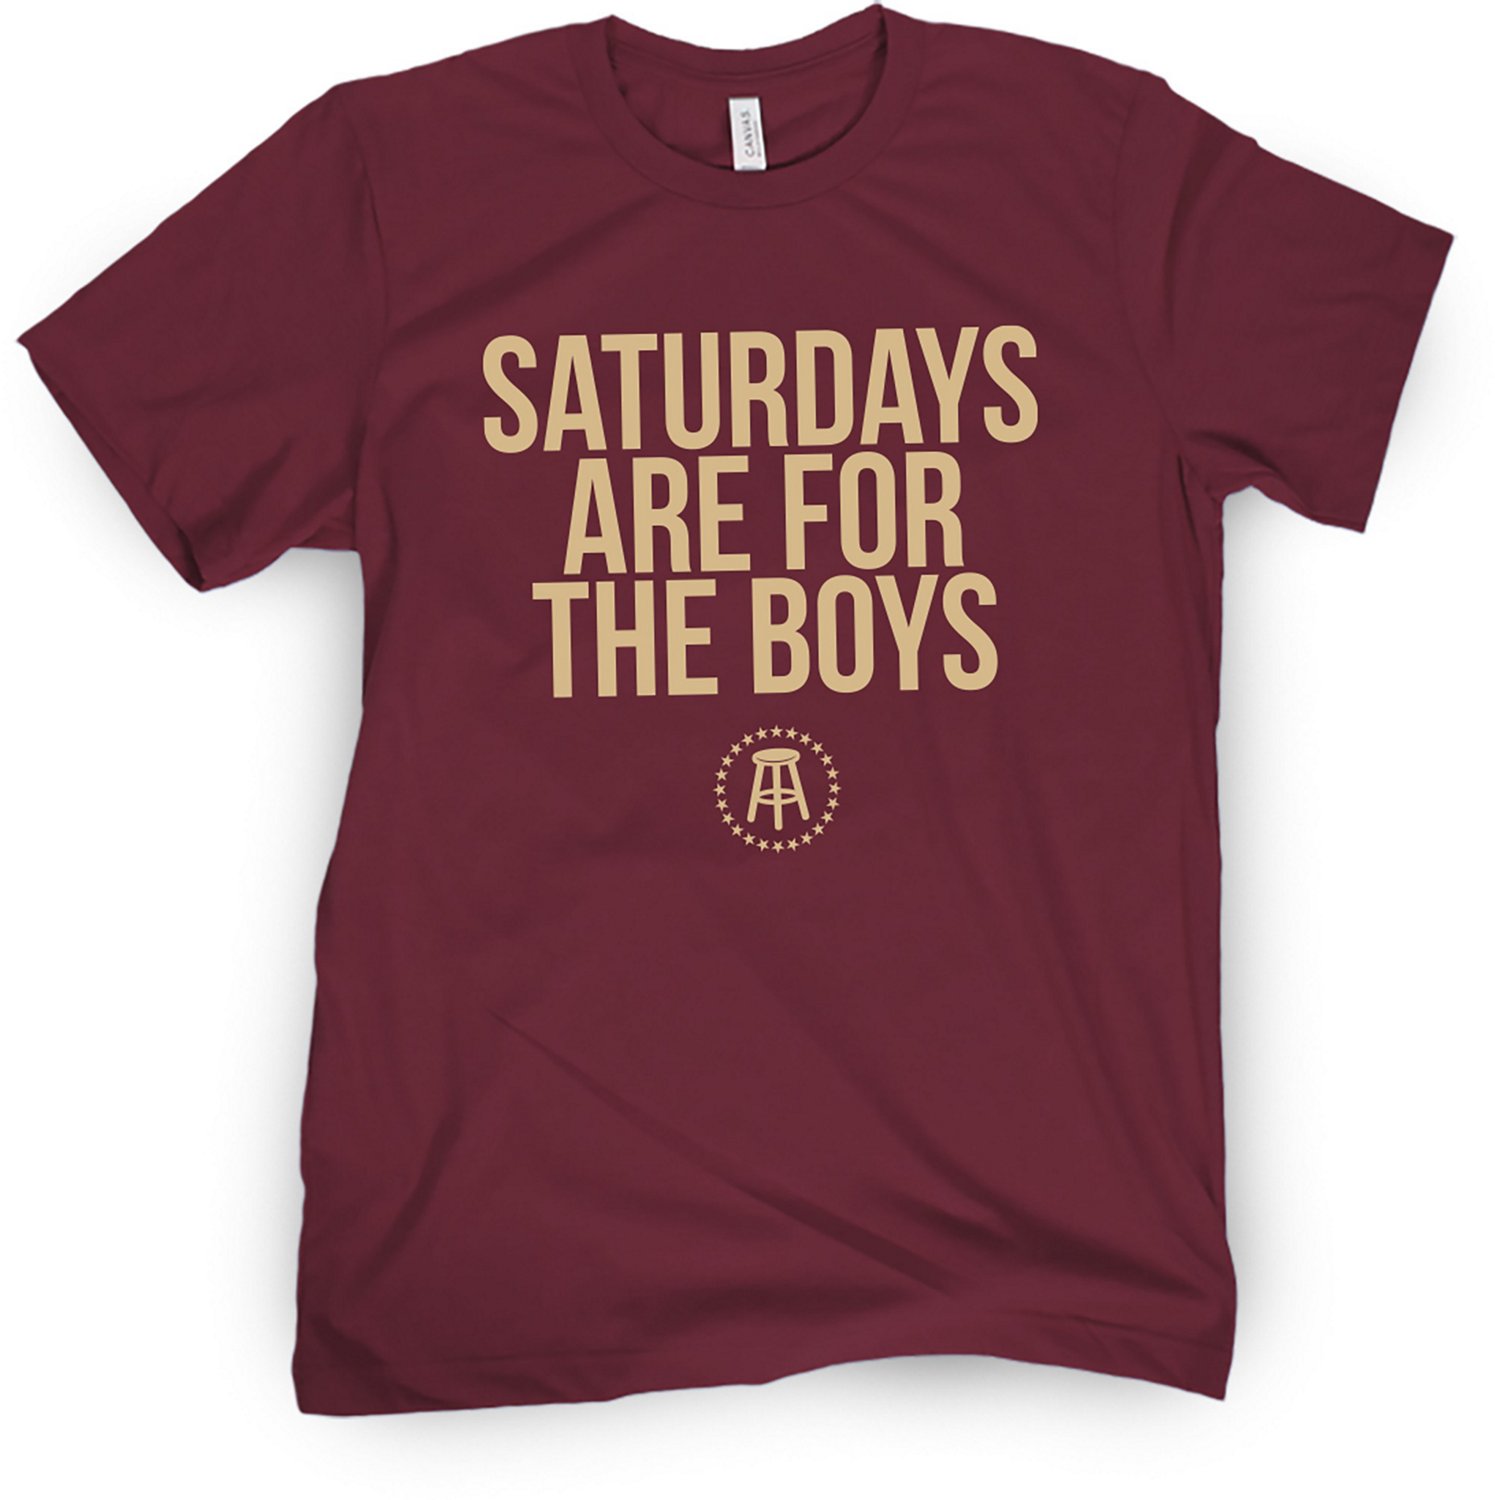 Barstool Sports Mens Saturdays Are For The Boys Graphic Short Sleeve T